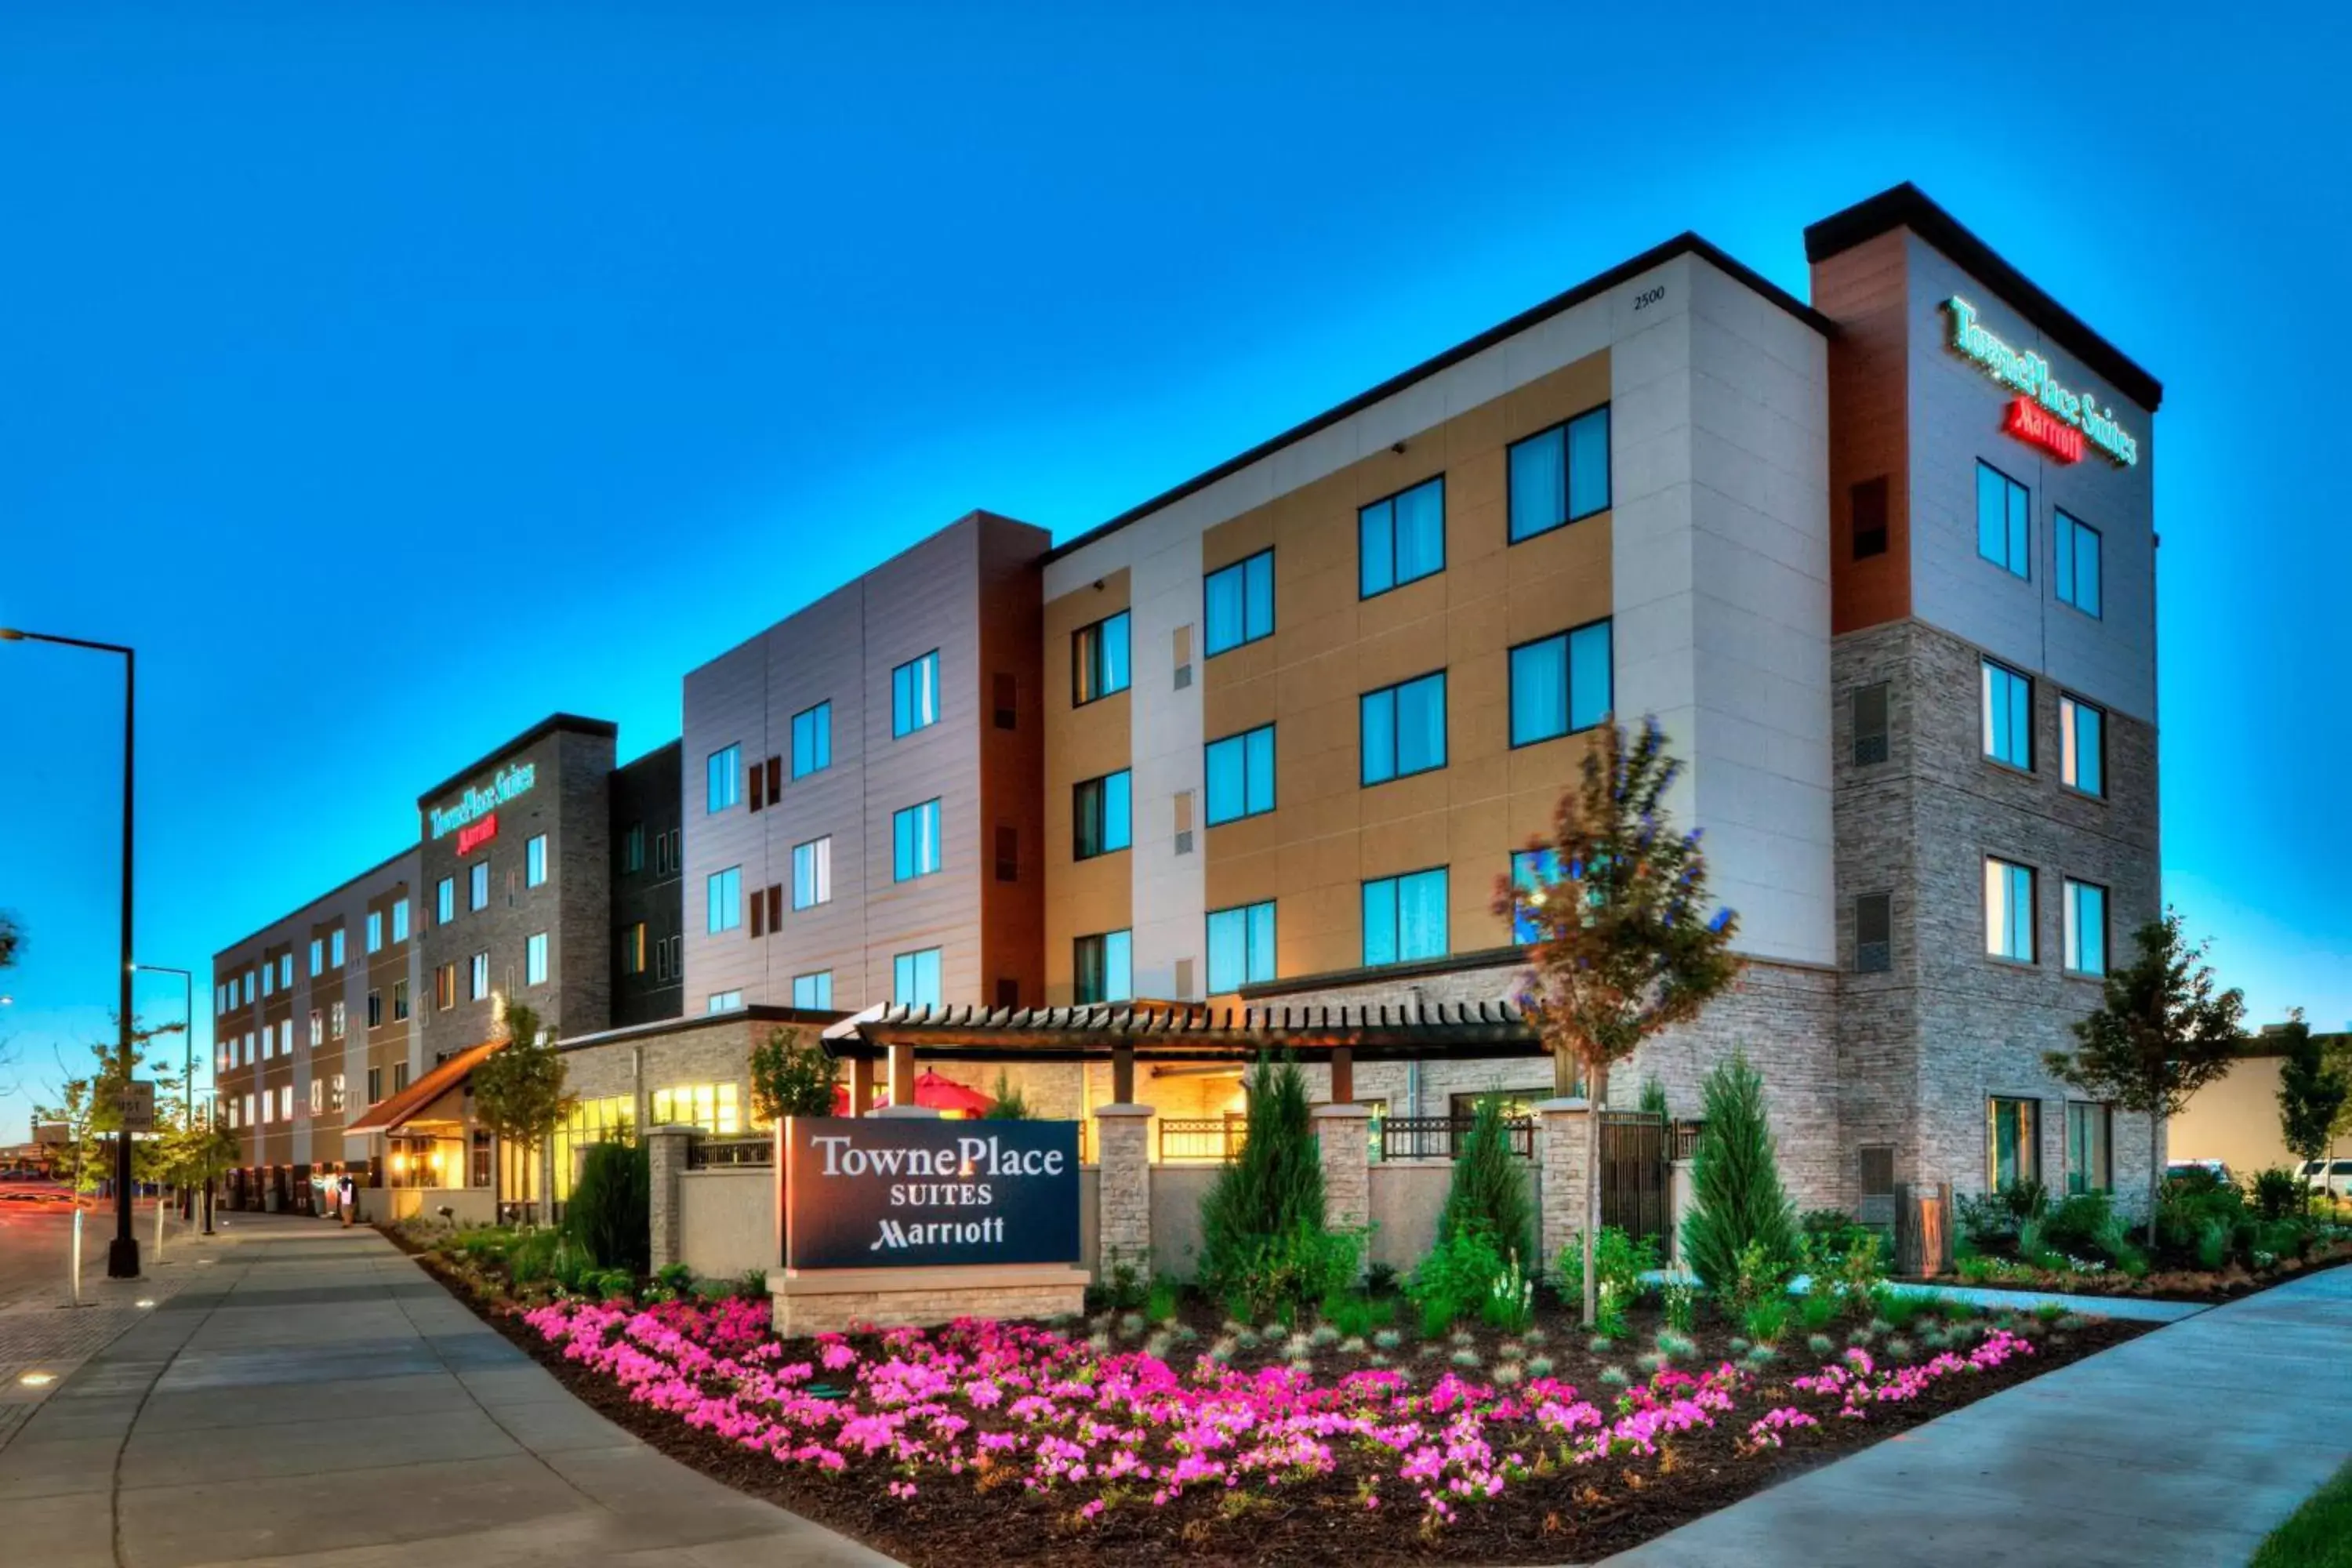 Property Building in TownePlace Suites by Marriott Minneapolis near Mall of America